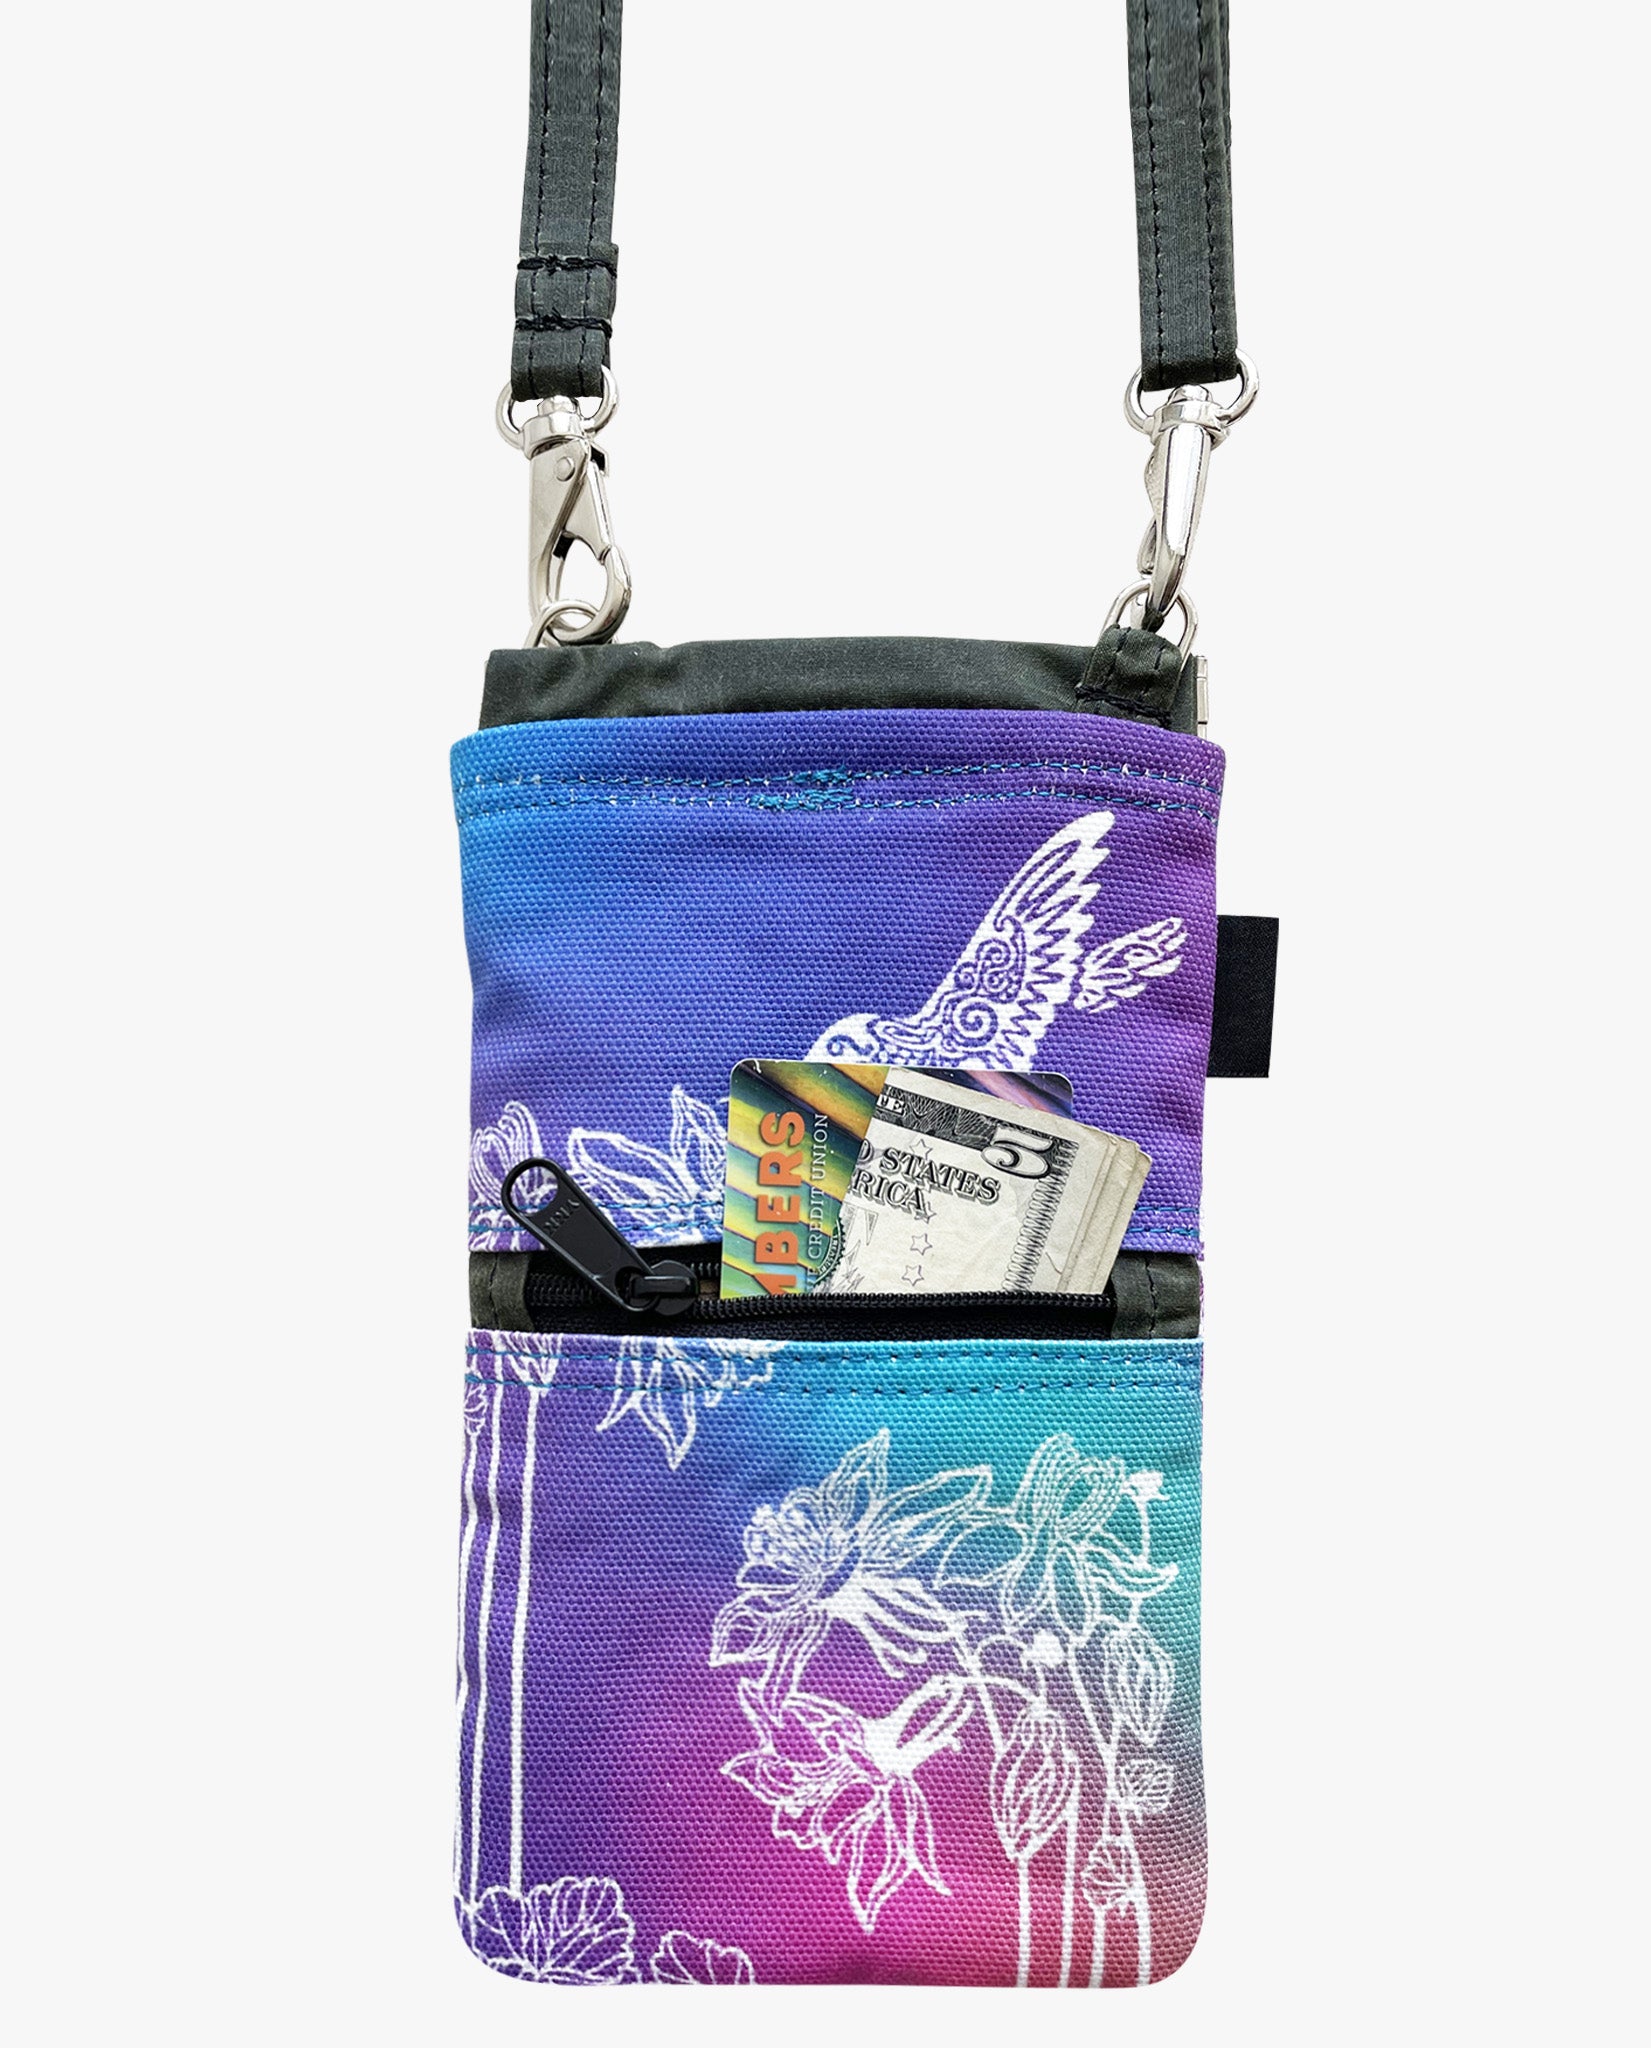 Hummingbird cell phone bag back view by Dock 5 Duluth